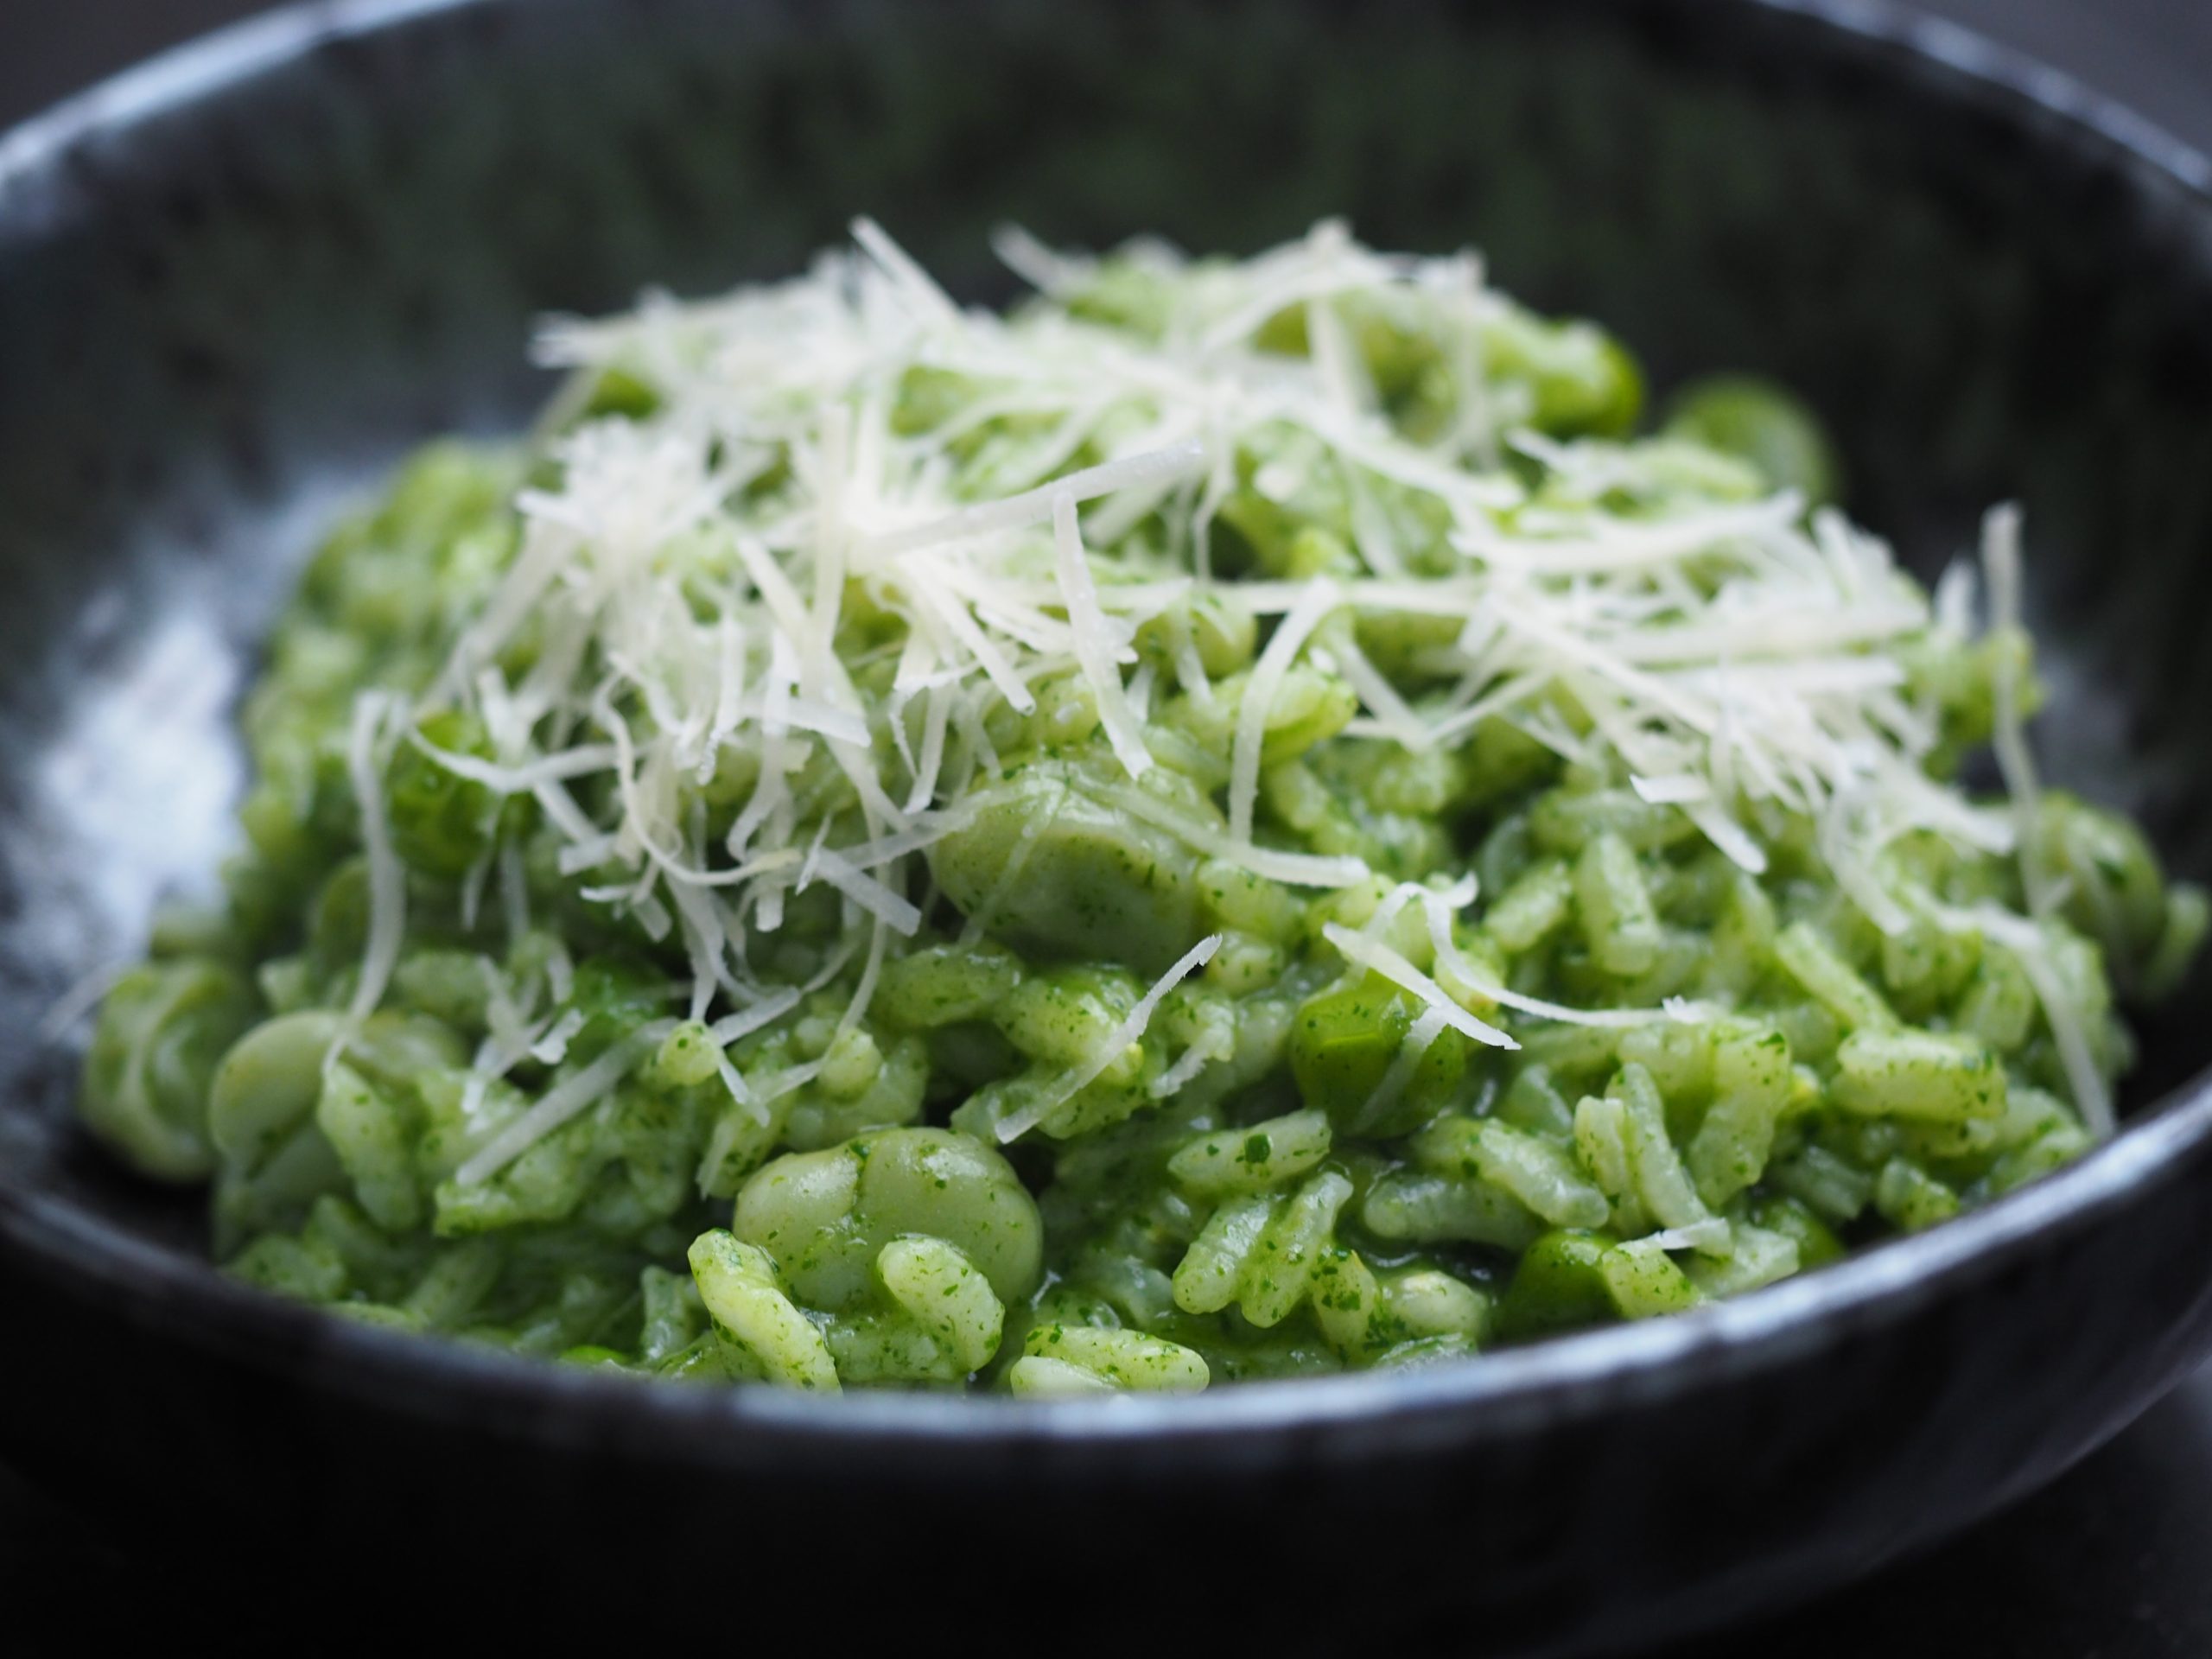 Green risotto (budget-friendly)